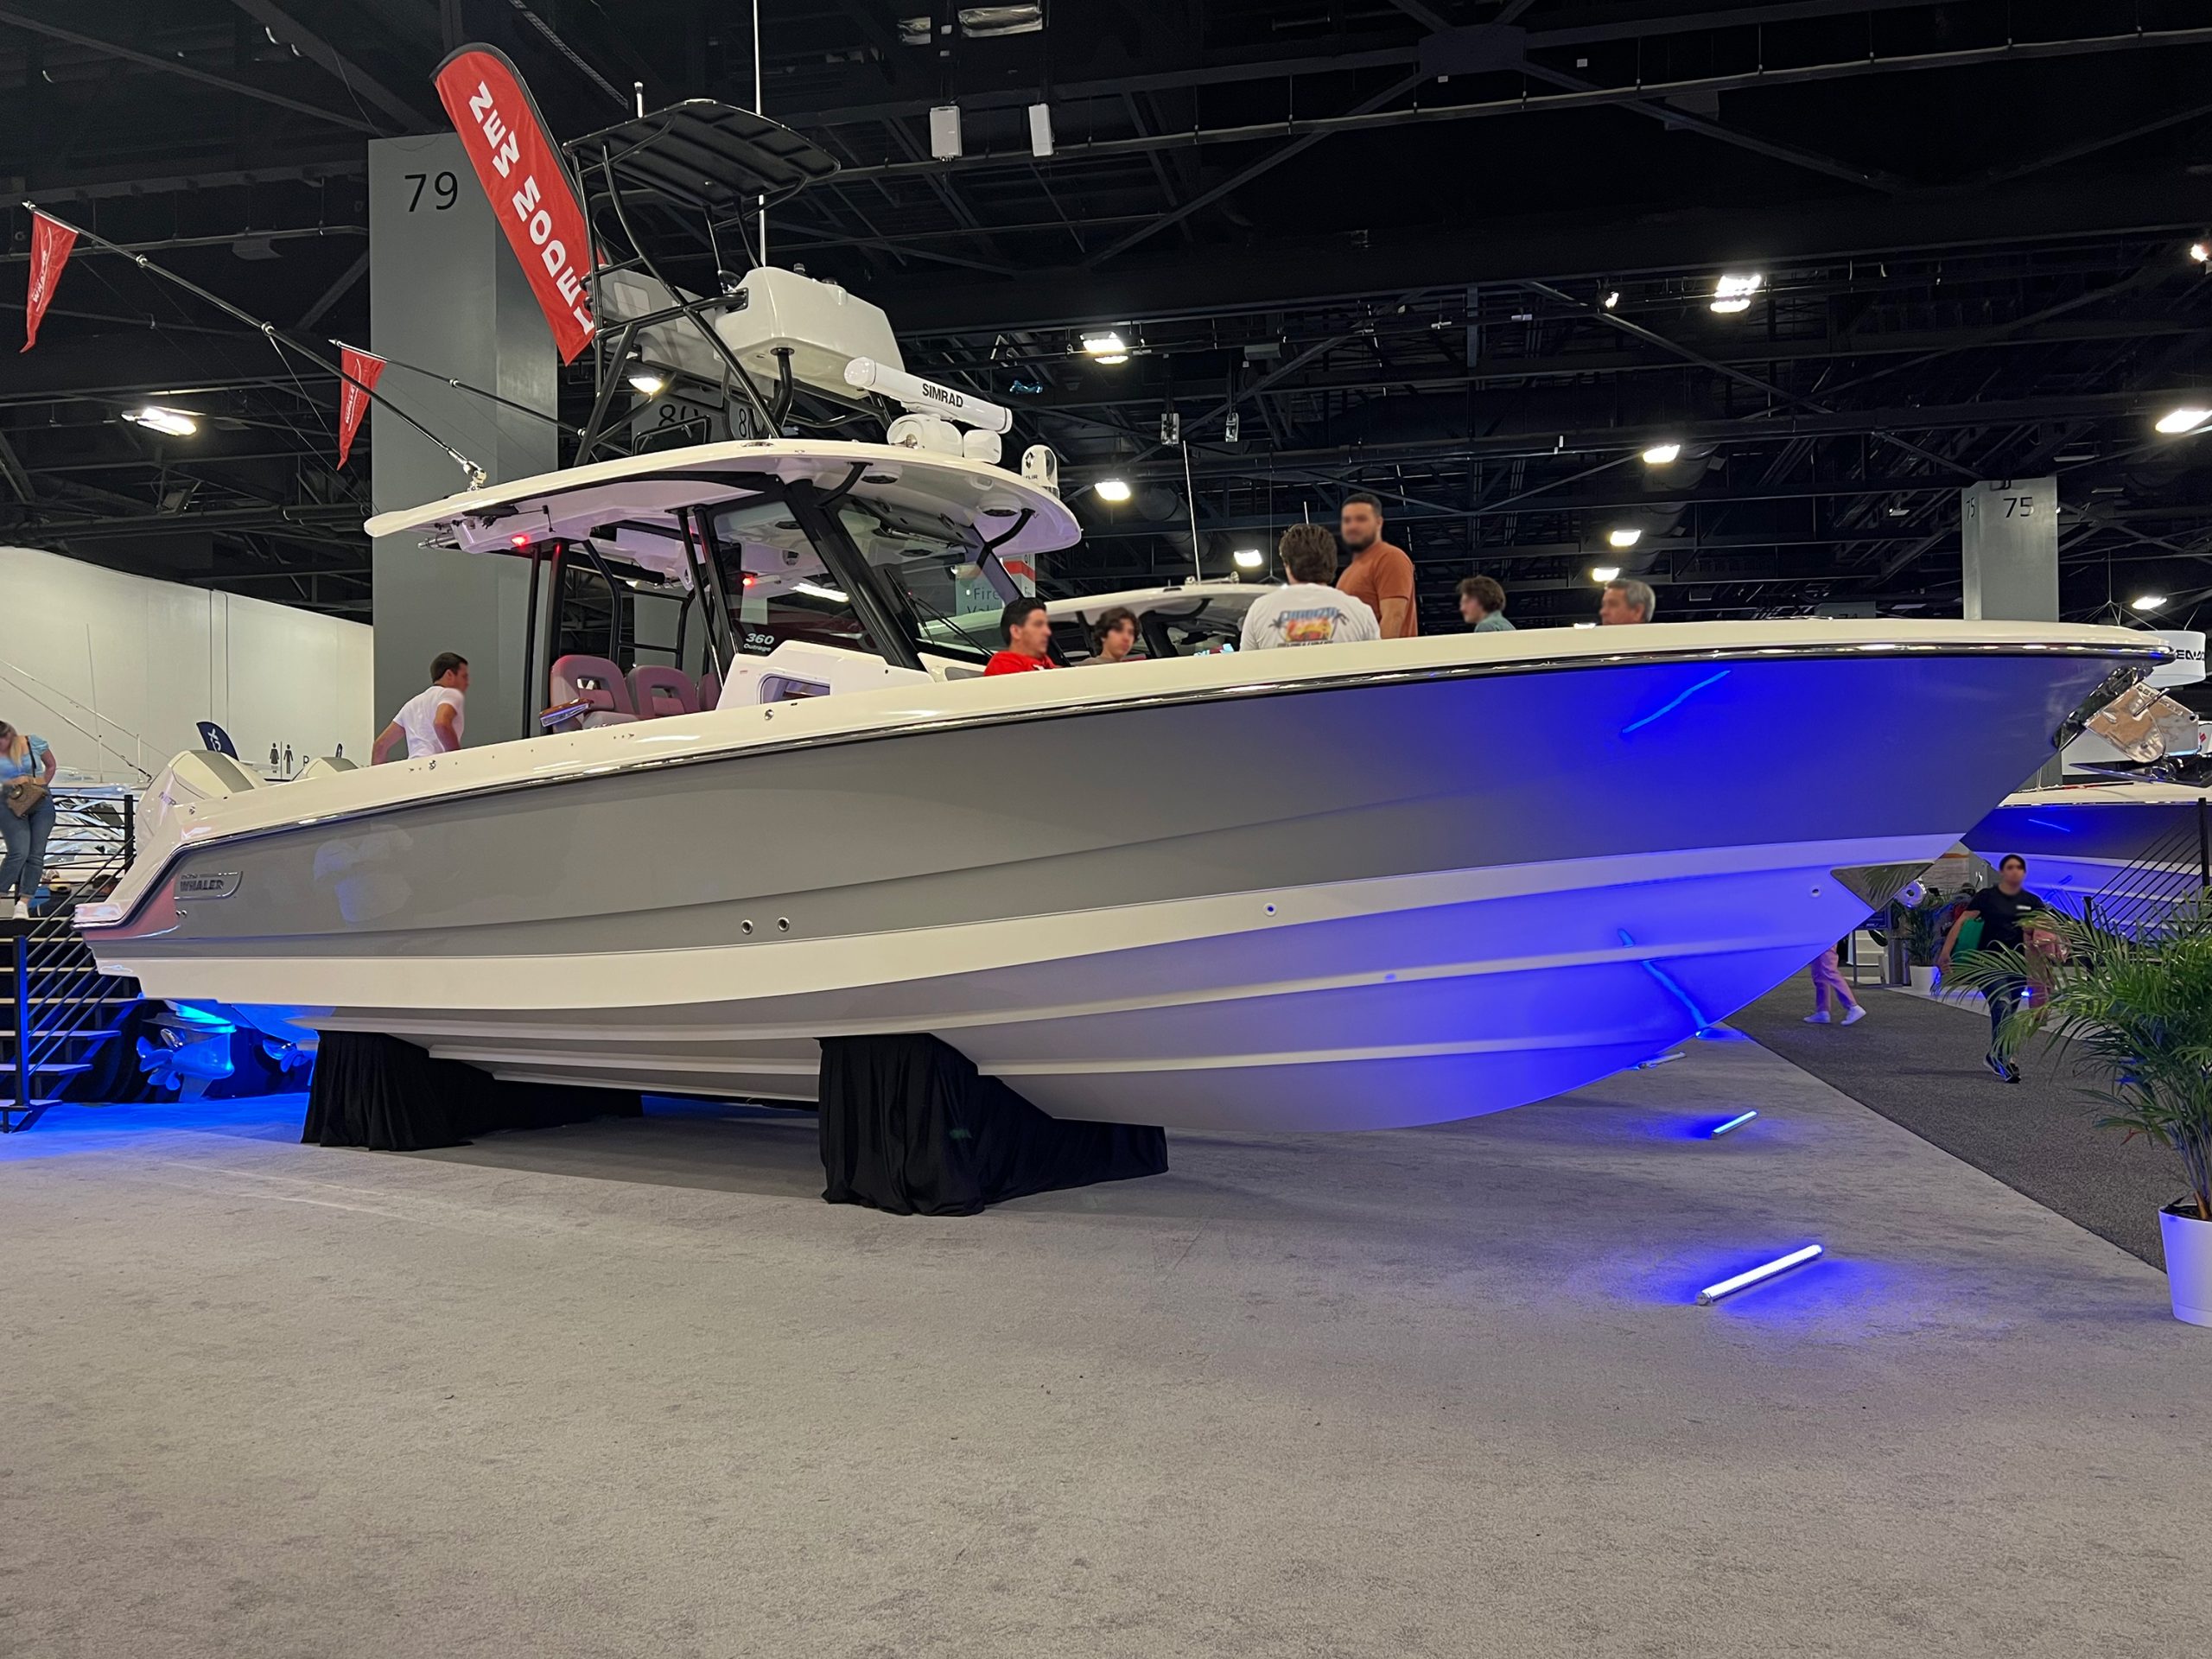 202 Boston Whaler 360 Outrage Center Console Boat At MIBS 2022